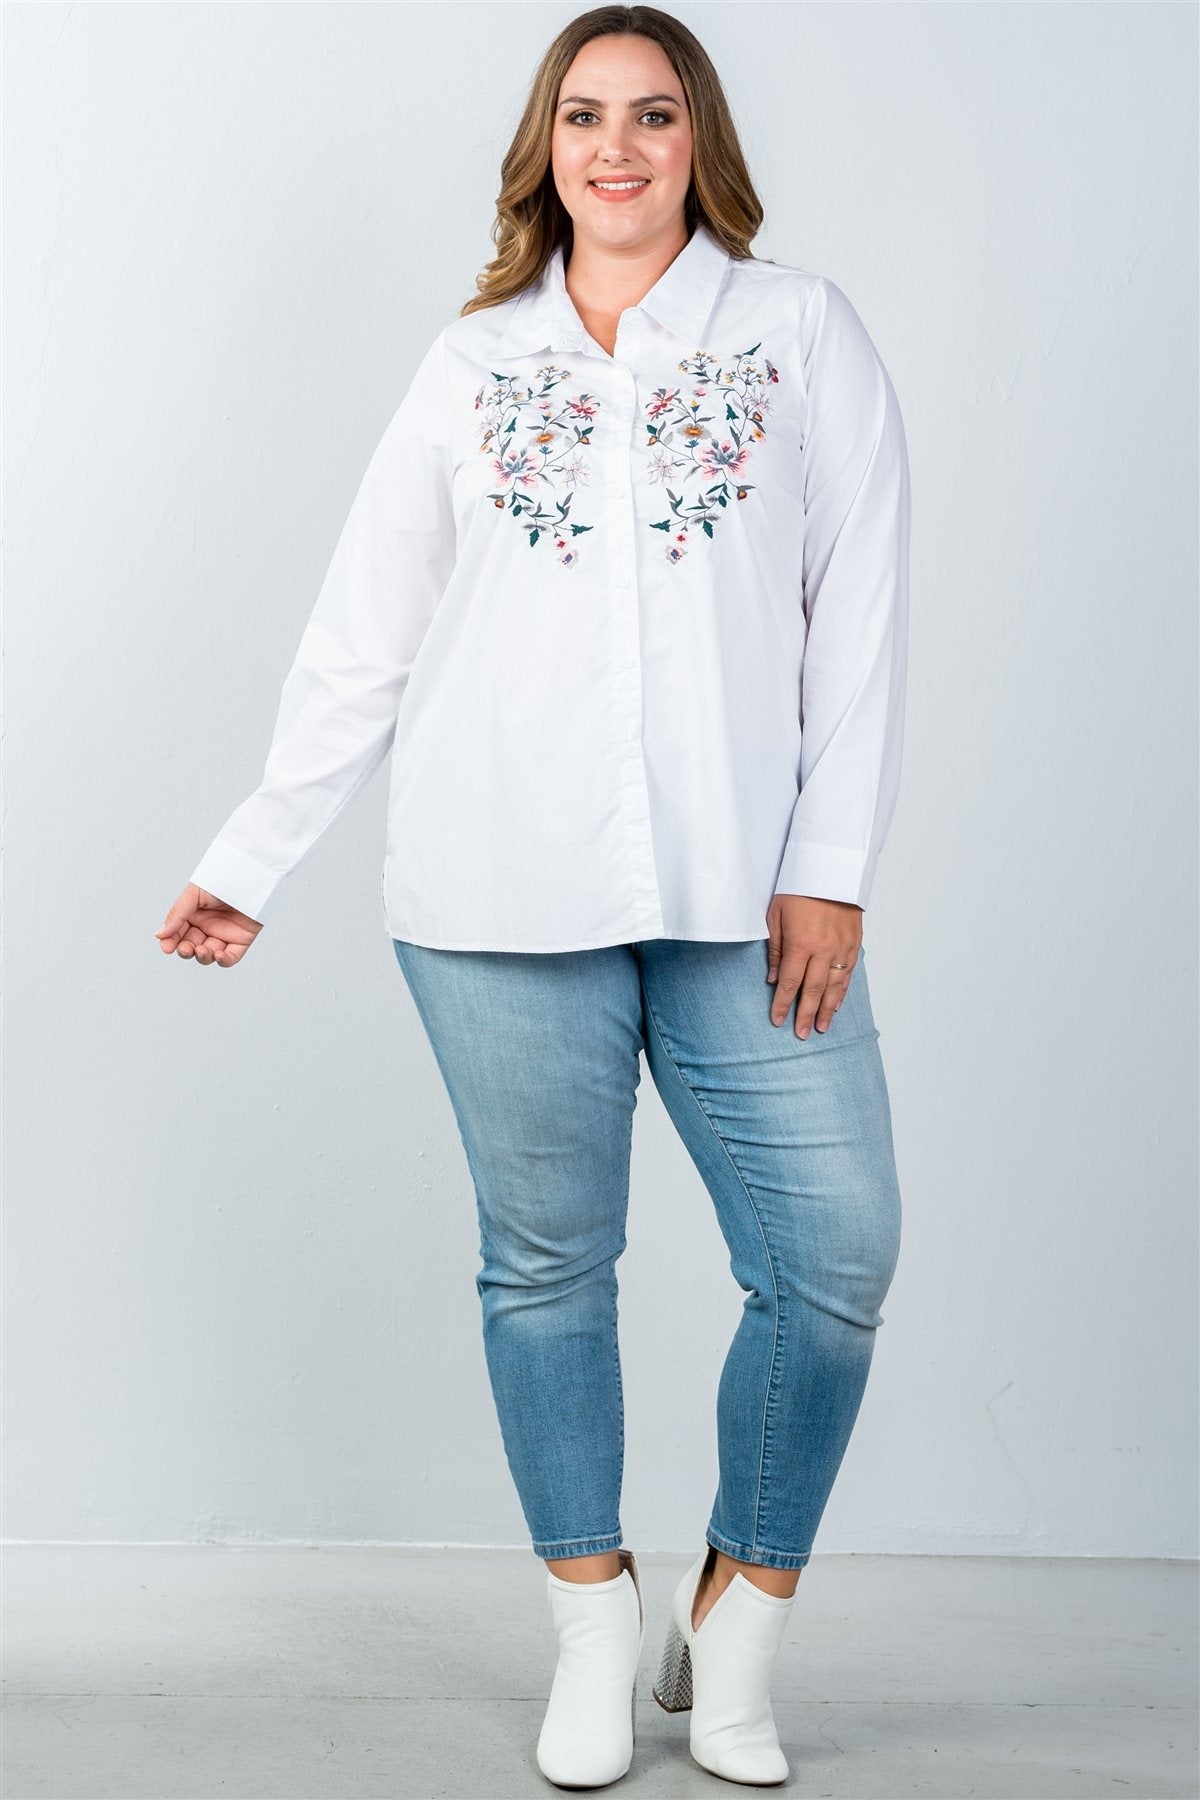 Ladies fashion plus size floral embroidered button down shirt